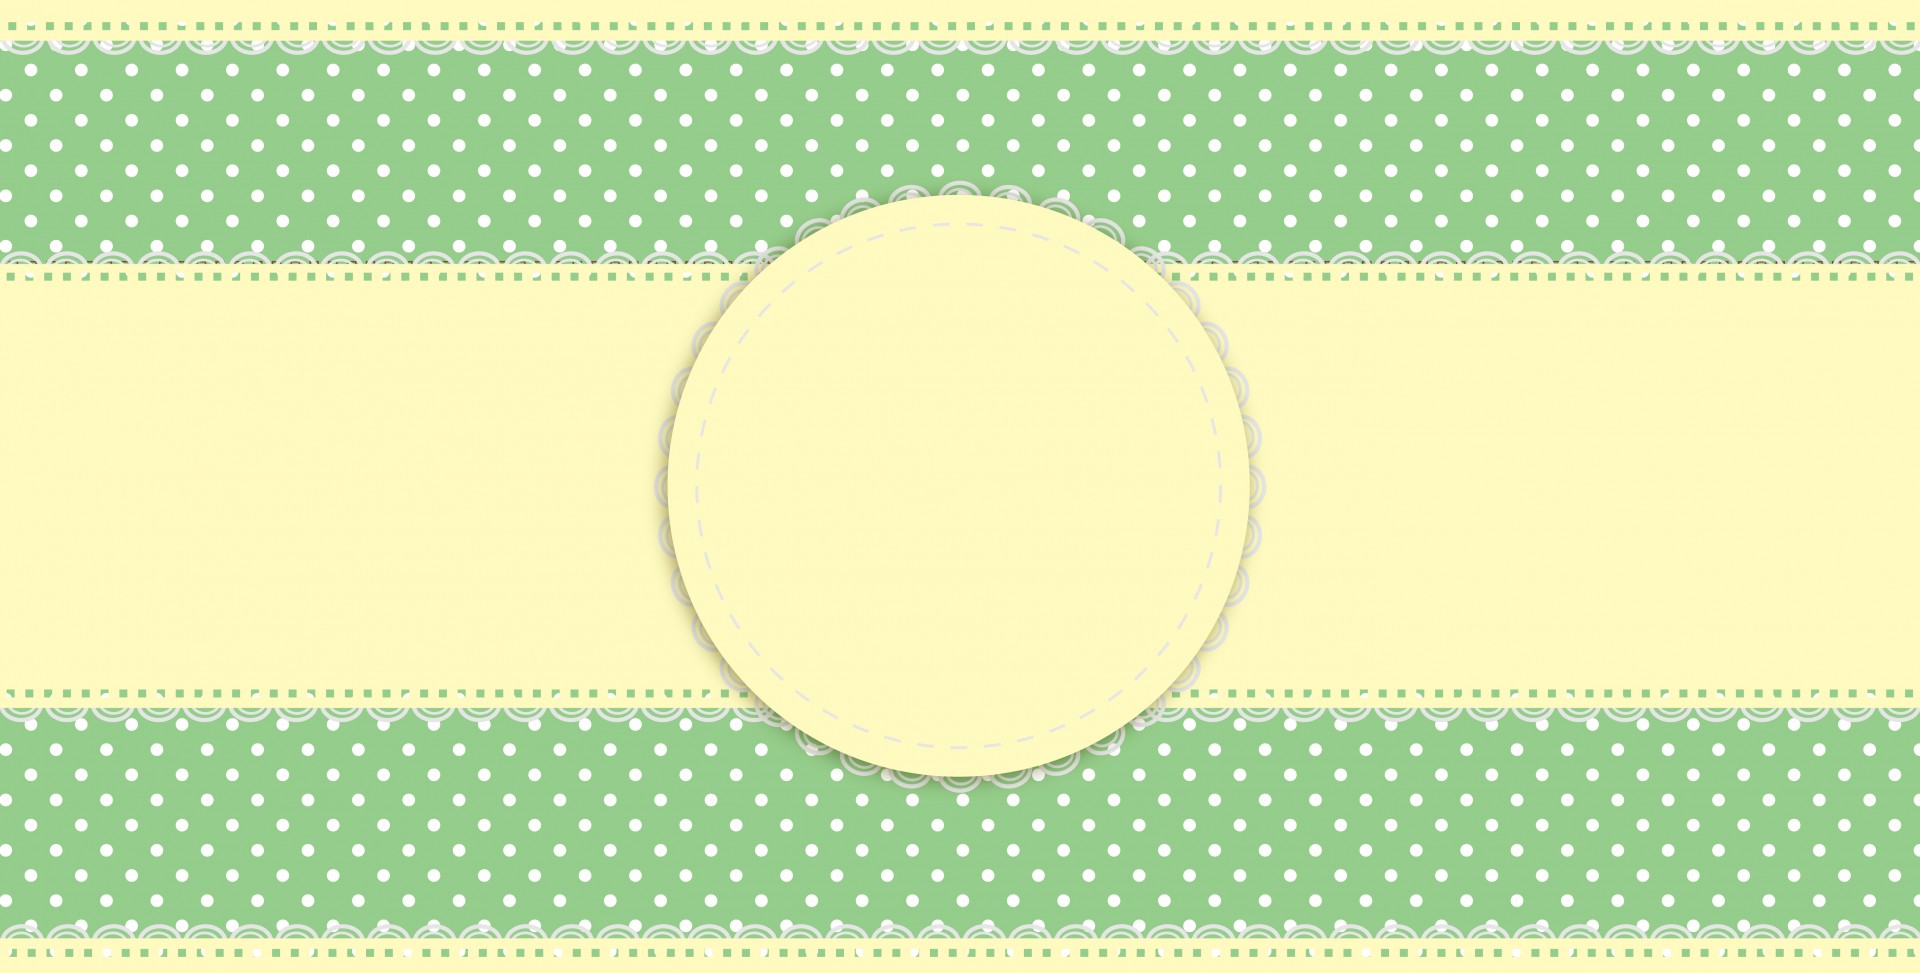 Pretty lacey polka dots green and yellow fancy border trim